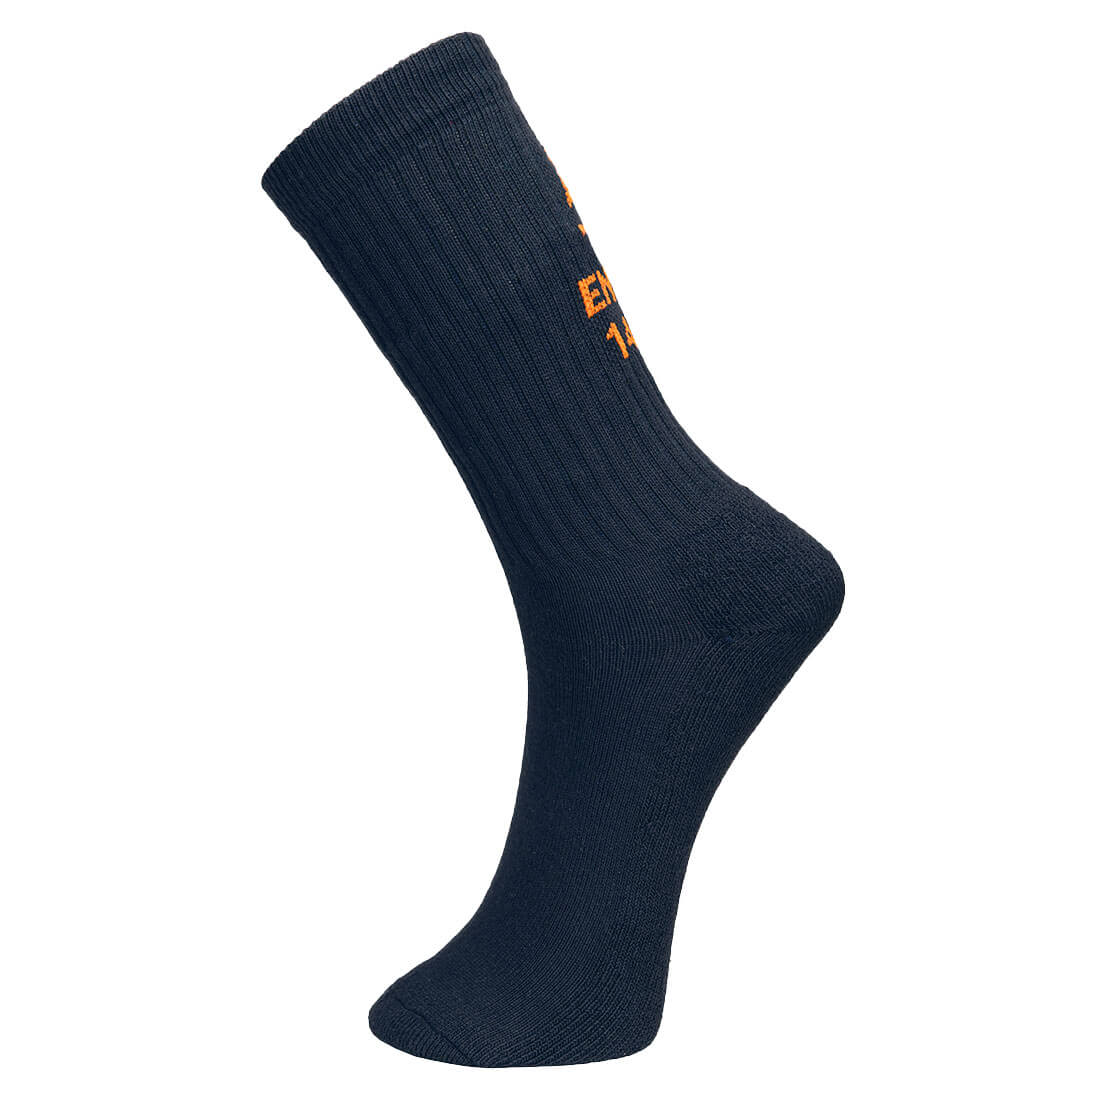 ModaFlame Flame Resistant Sock